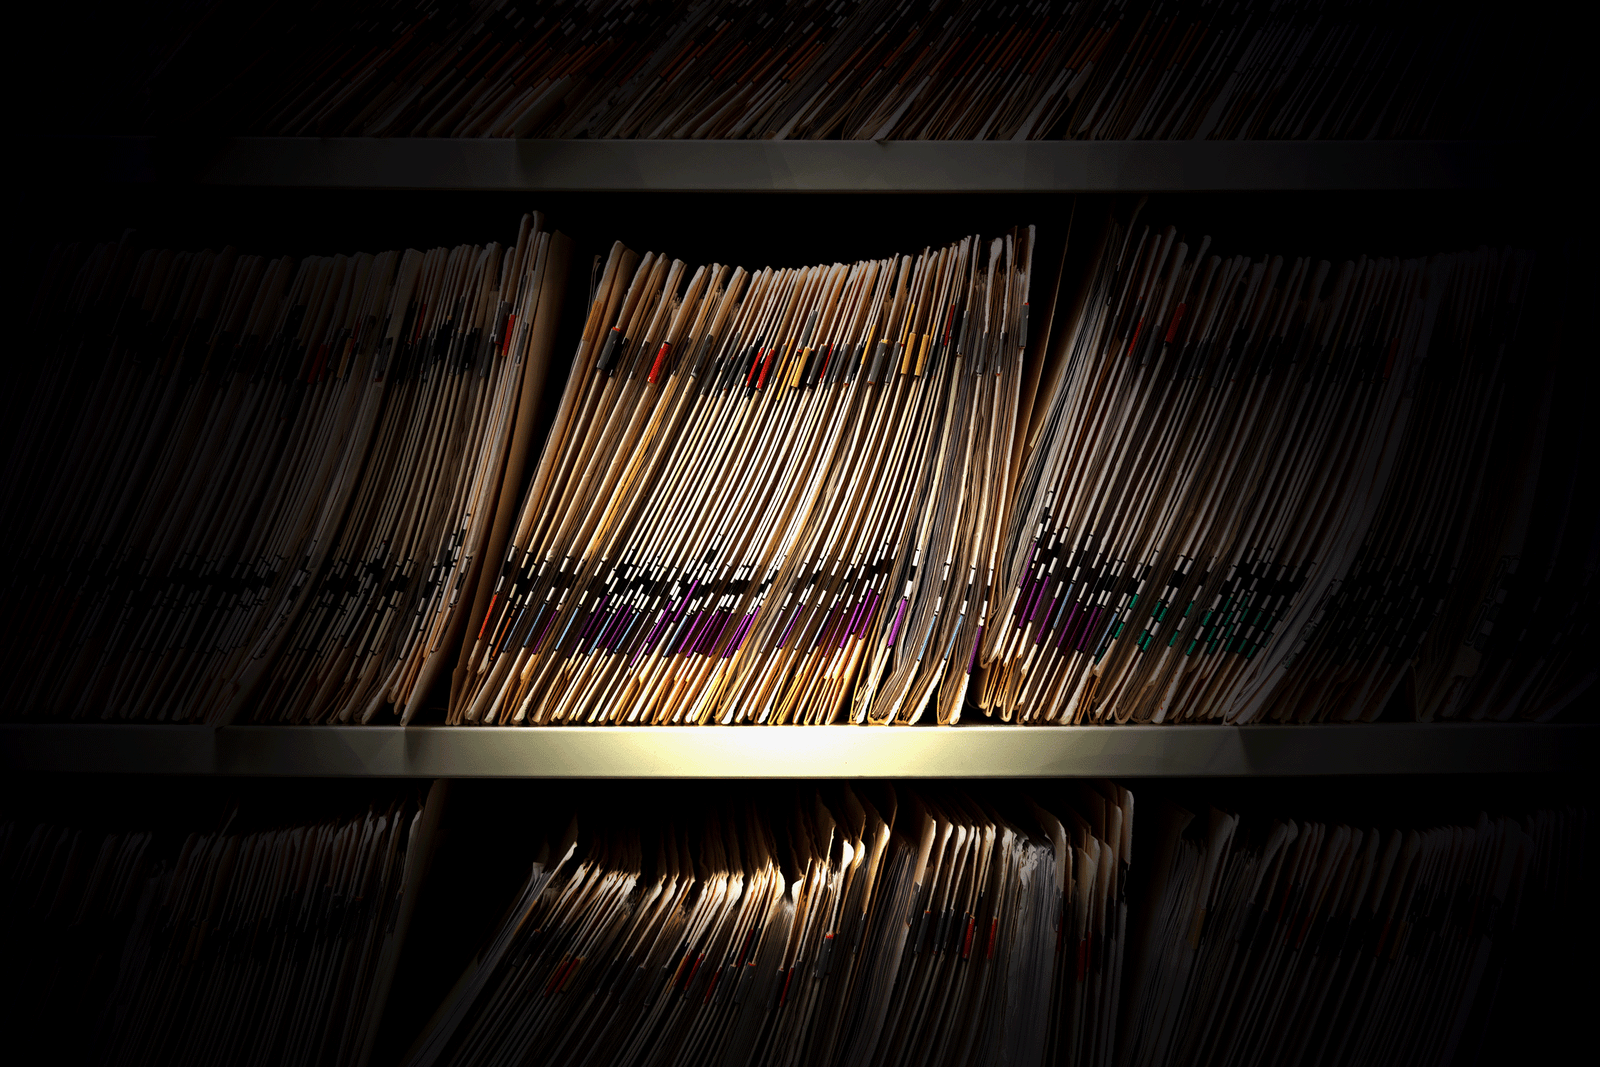 Medical records on a shelf with a spotlight shining on them in the dark